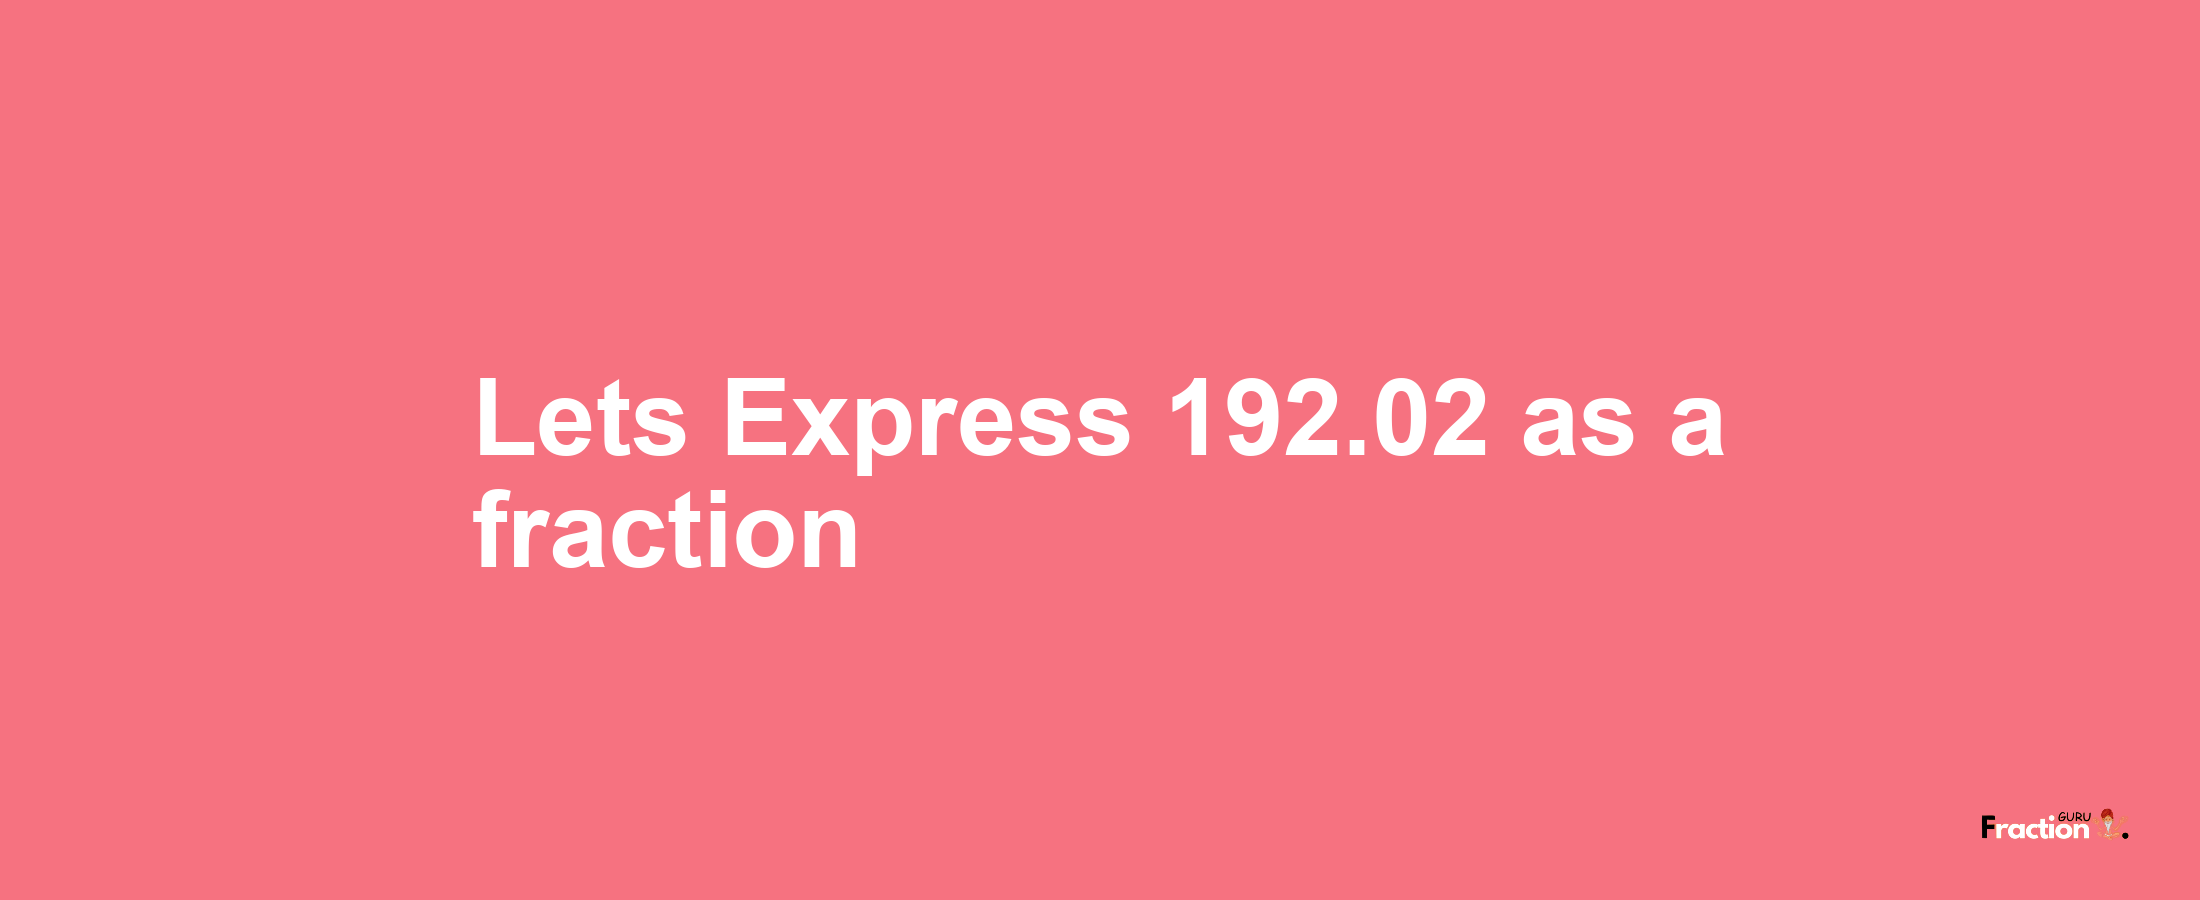 Lets Express 192.02 as afraction